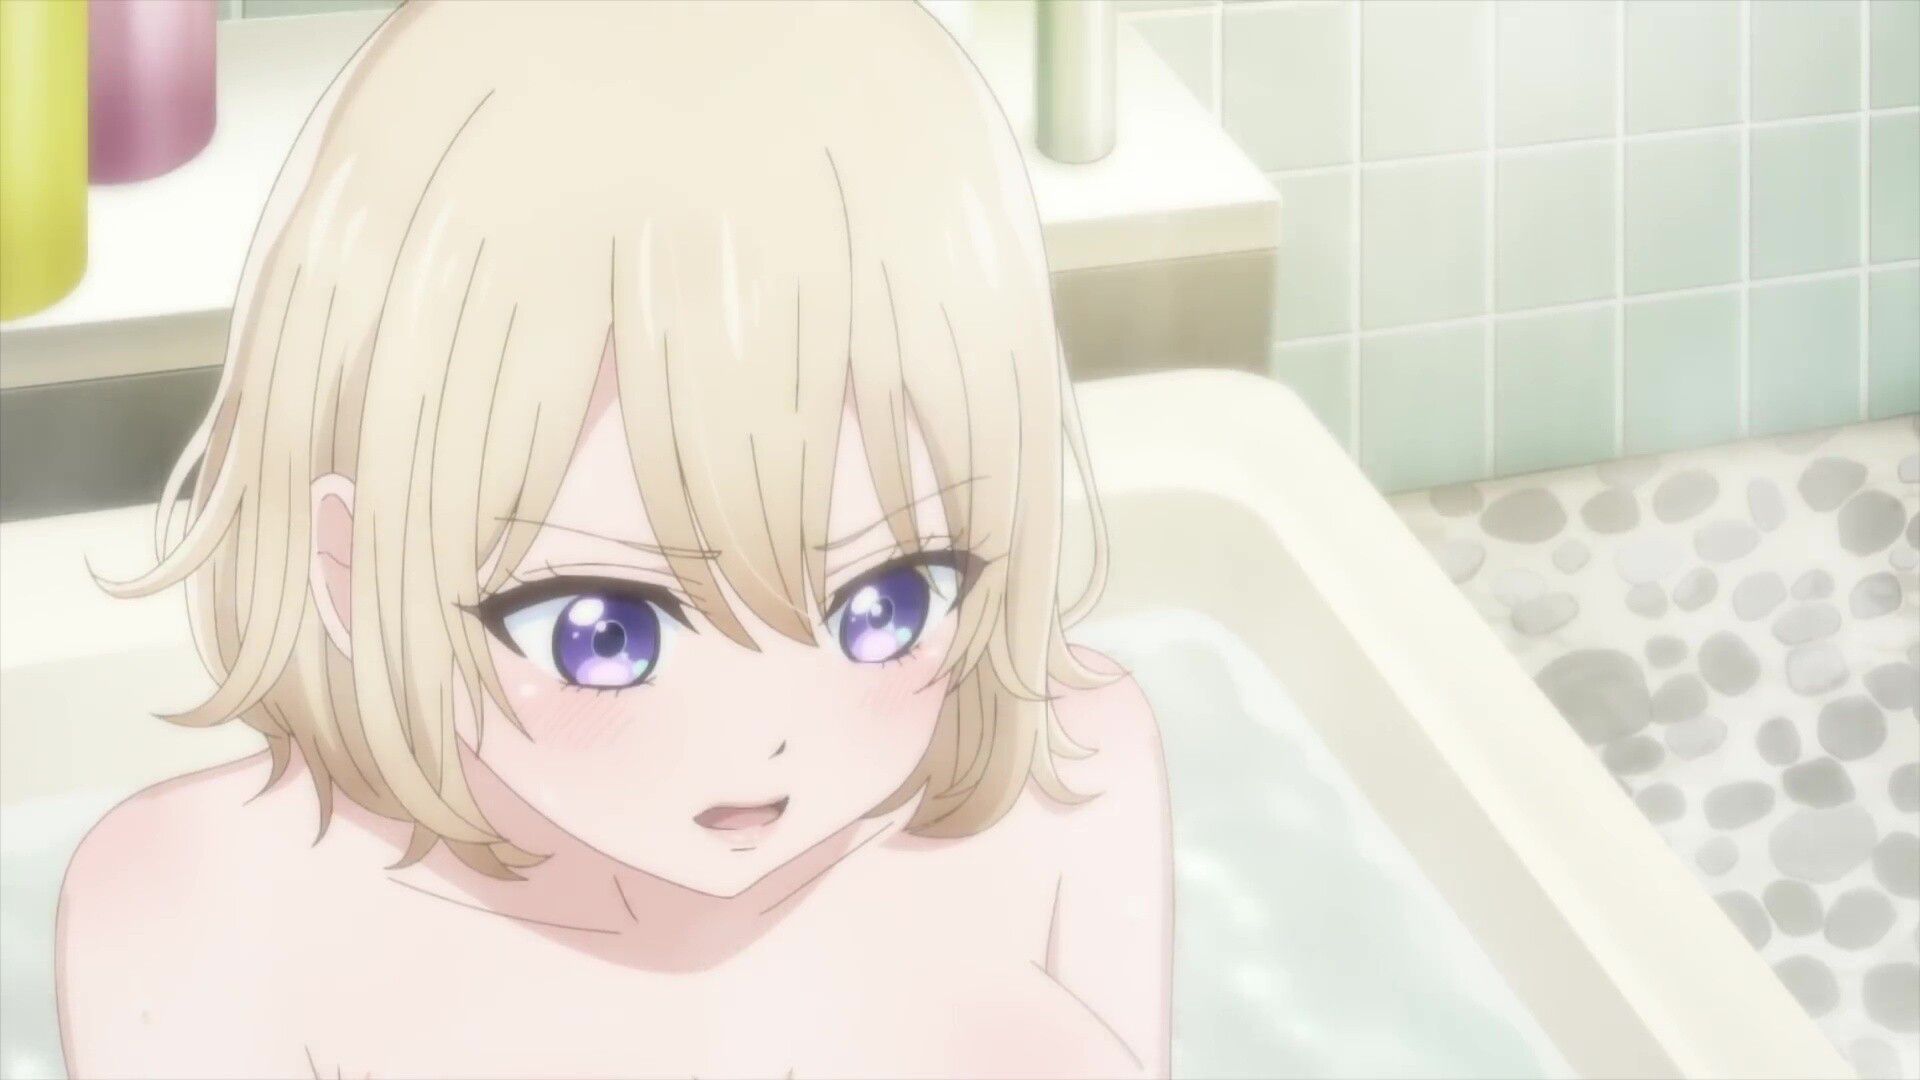 Anime "Cuckoo's Wife" Erotic girls bathing scenes and so on! Broadcasting starts in April 4